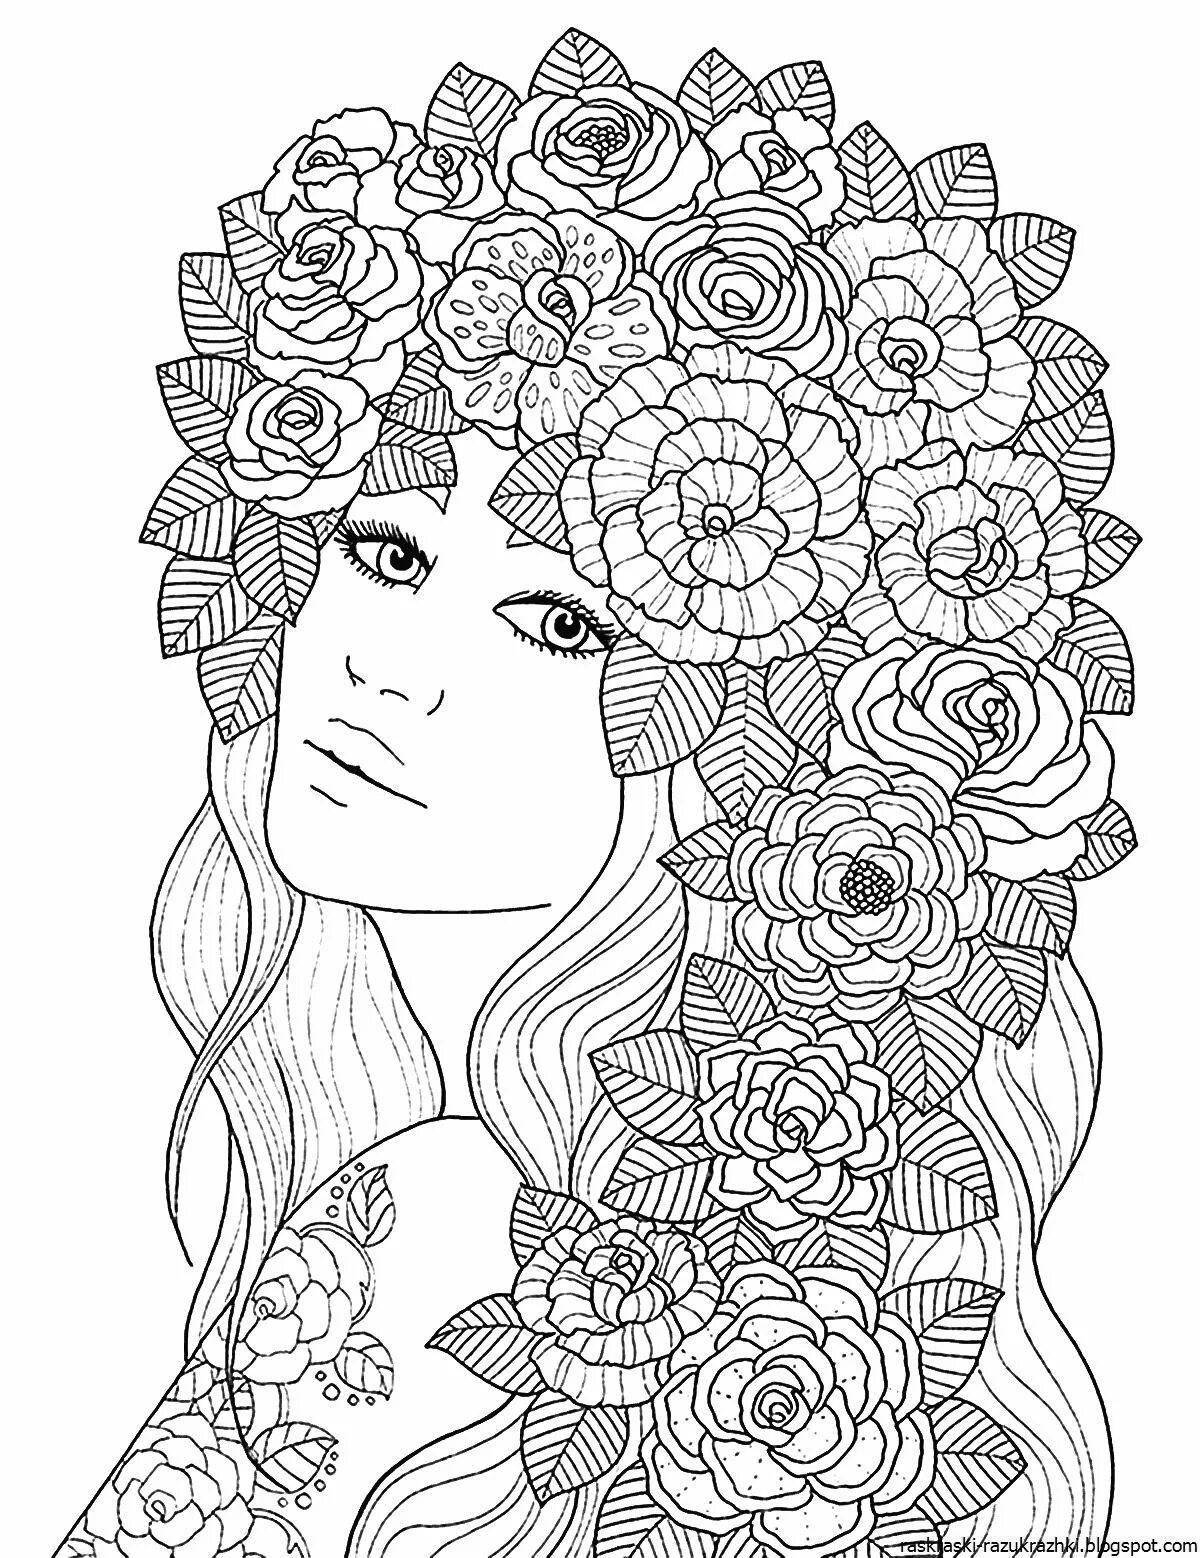 Luxury coloring book, beautiful for all adults